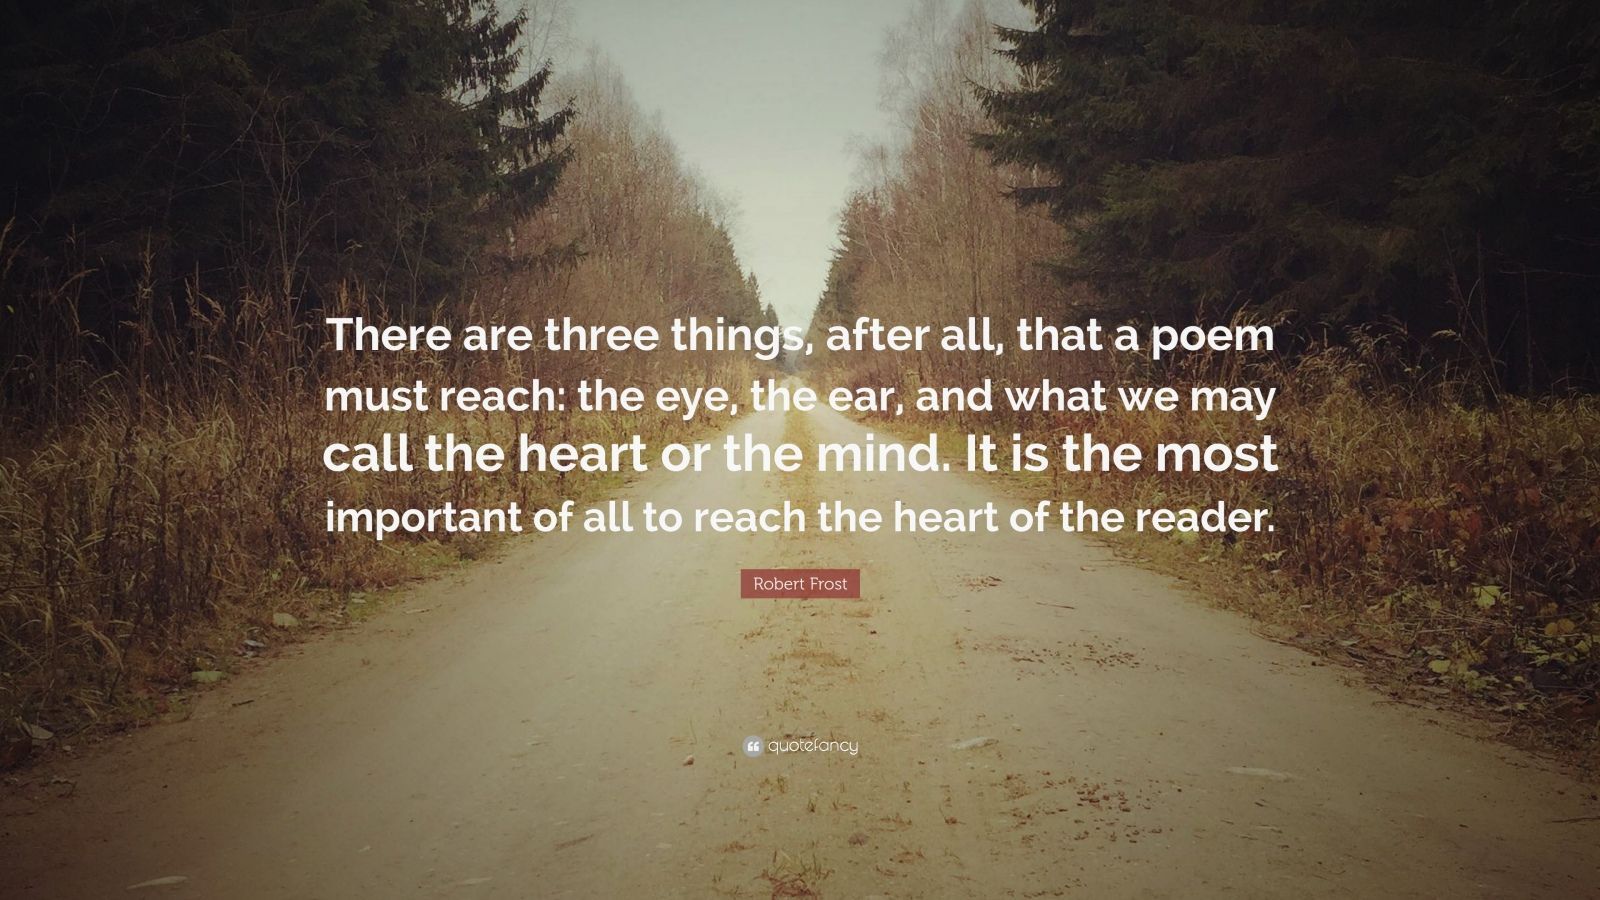 a poem must reach: the eye, the ear .quotefancy.com